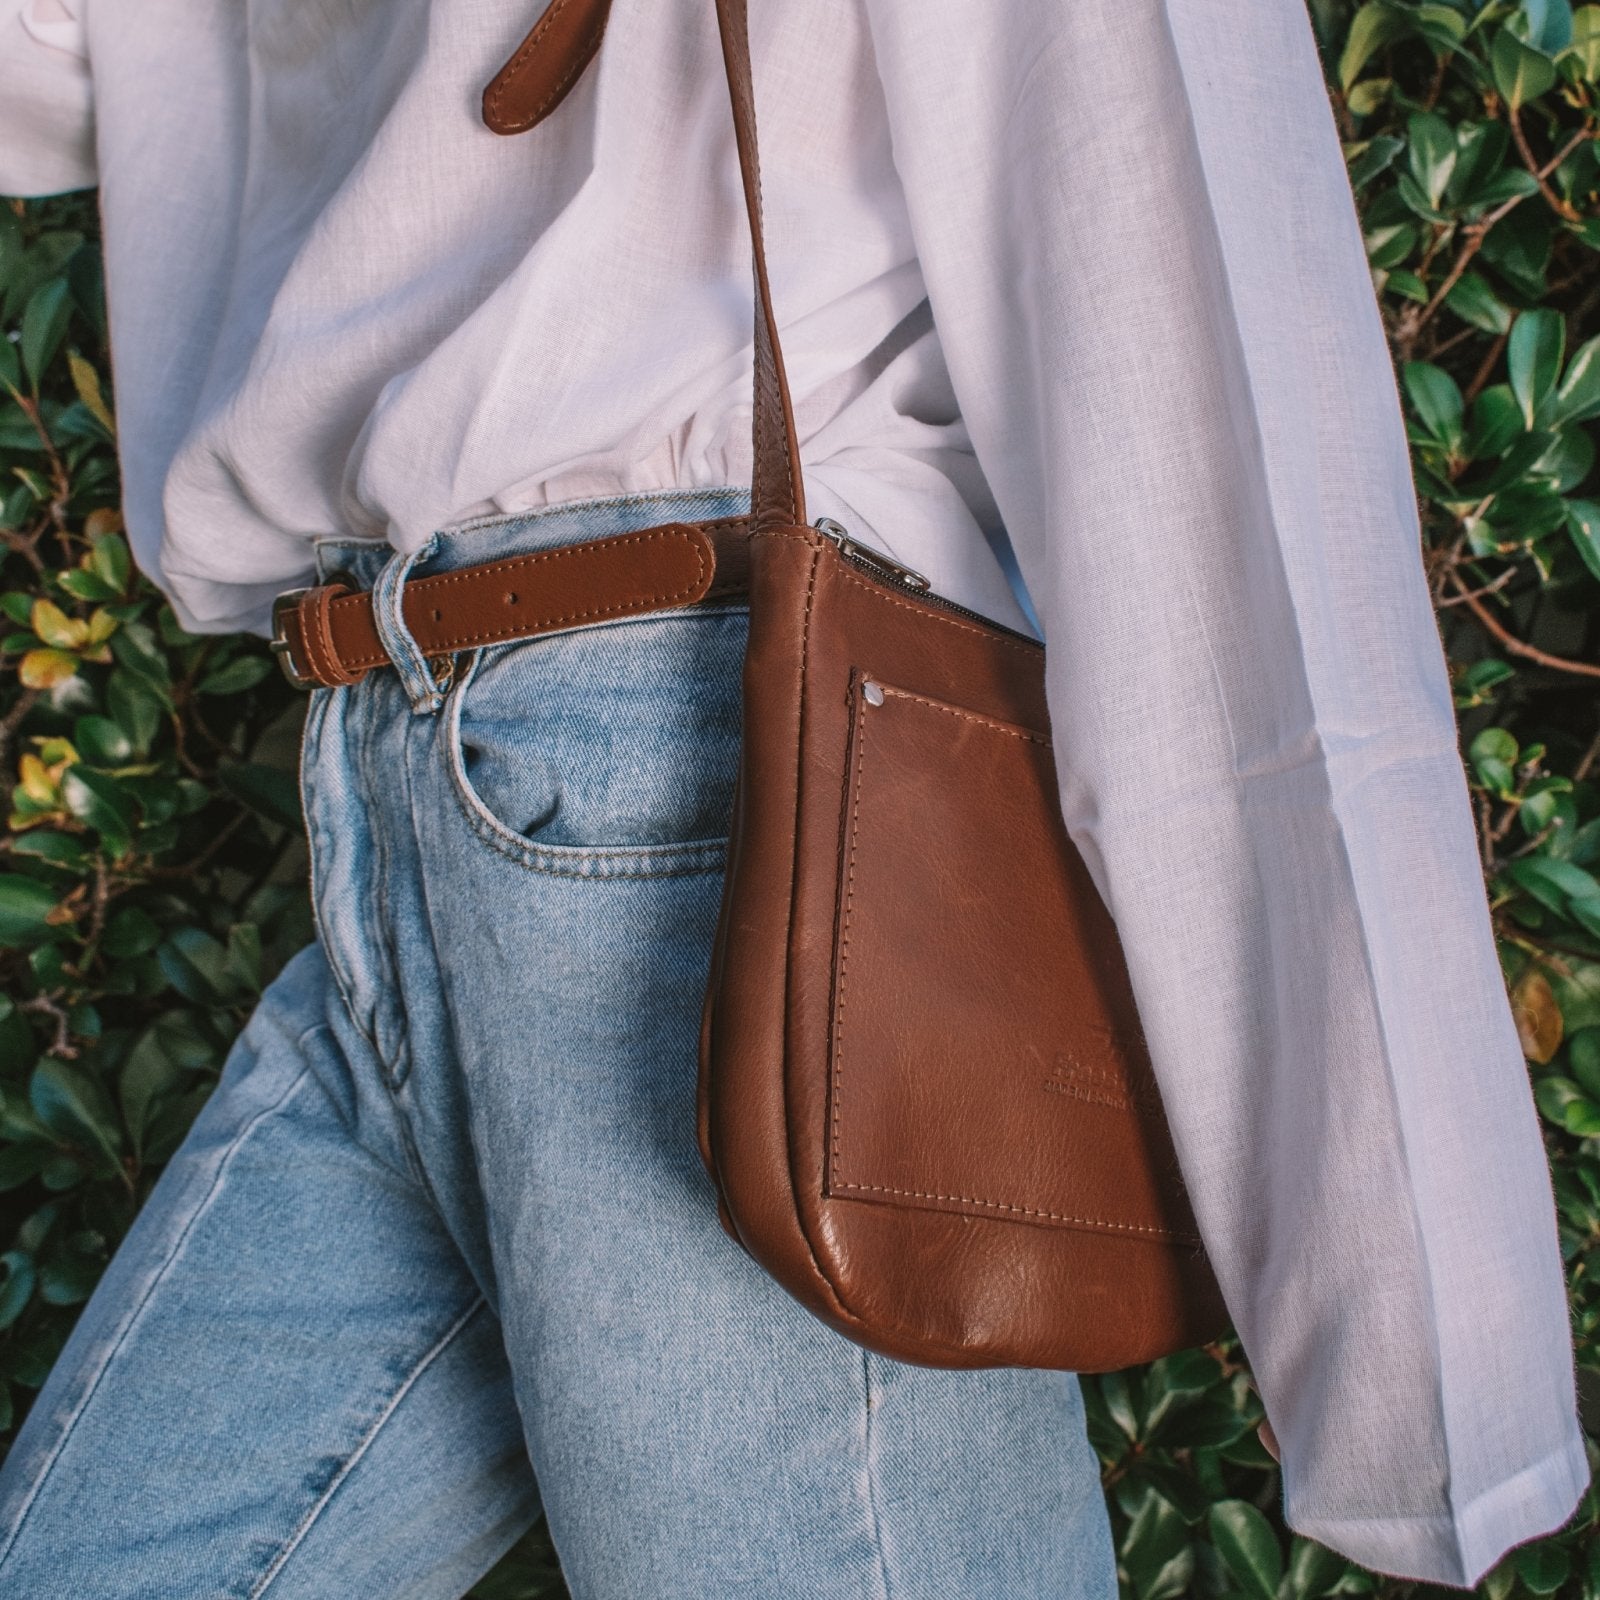 Tayla Essential Leather Handbag - Freestyle SA Proudly local leather boots veldskoens vellies leather shoes suede veldskoens